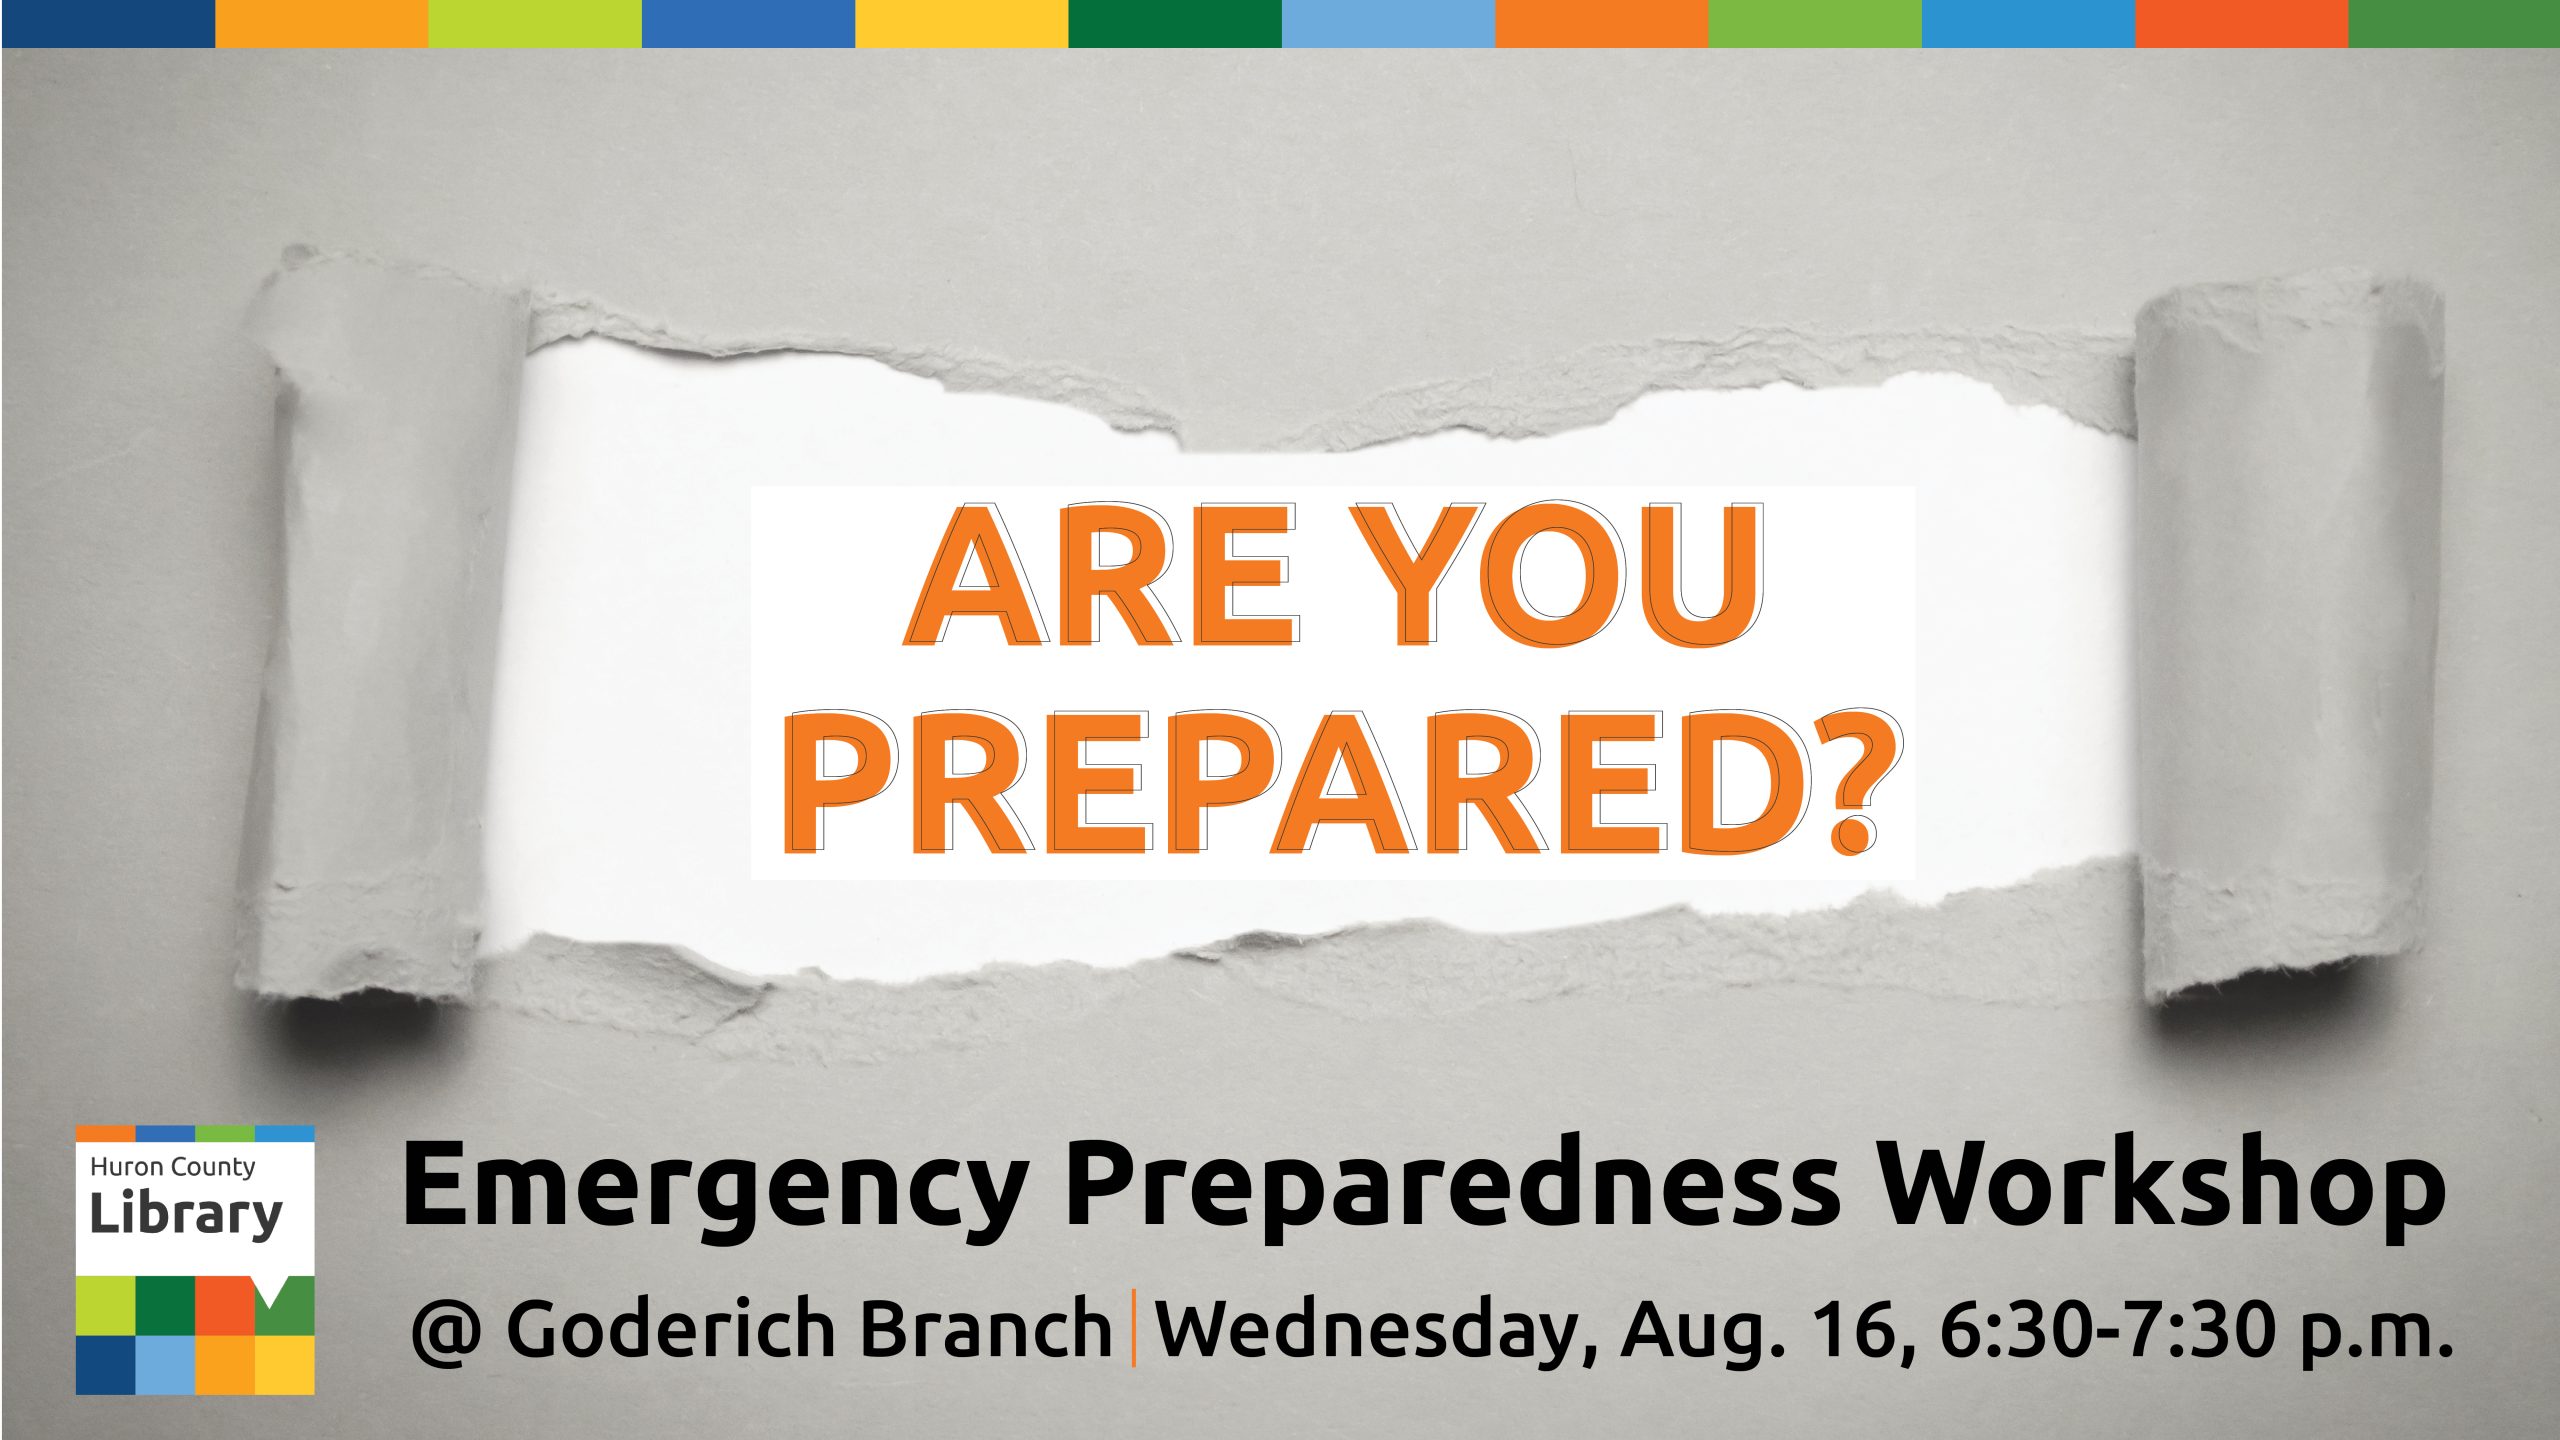 Illustration of a ripped piece of paper with text promoting Emergency Preparedness Workshop at Goderich Branch